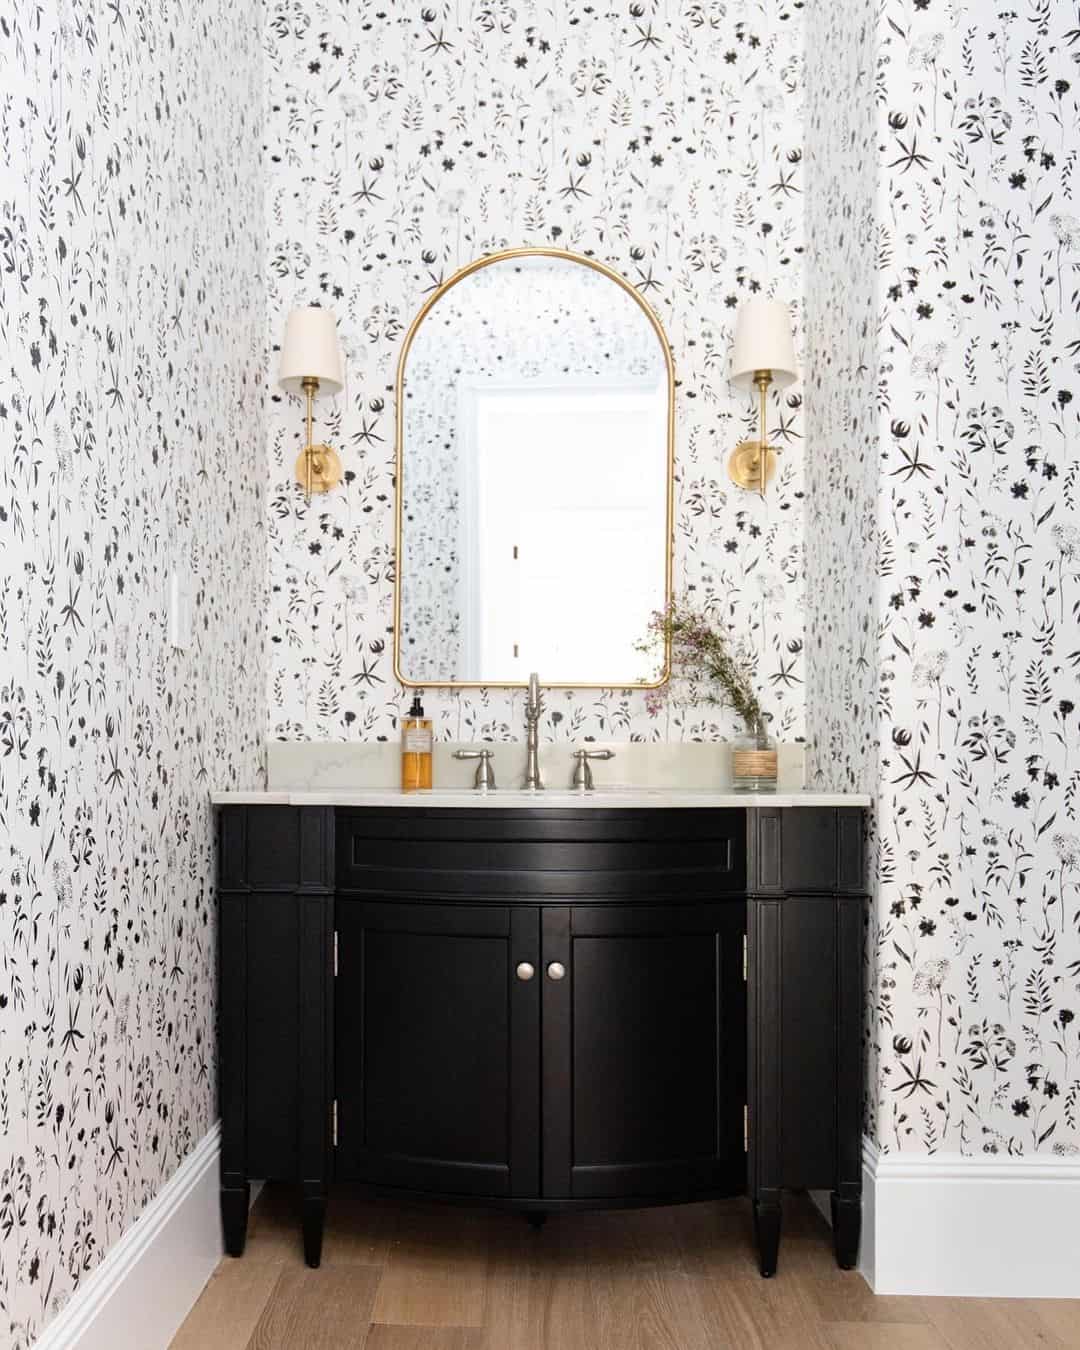 Want a Powder Room That Pops? Steal This Interior Design Power Move - WSJ